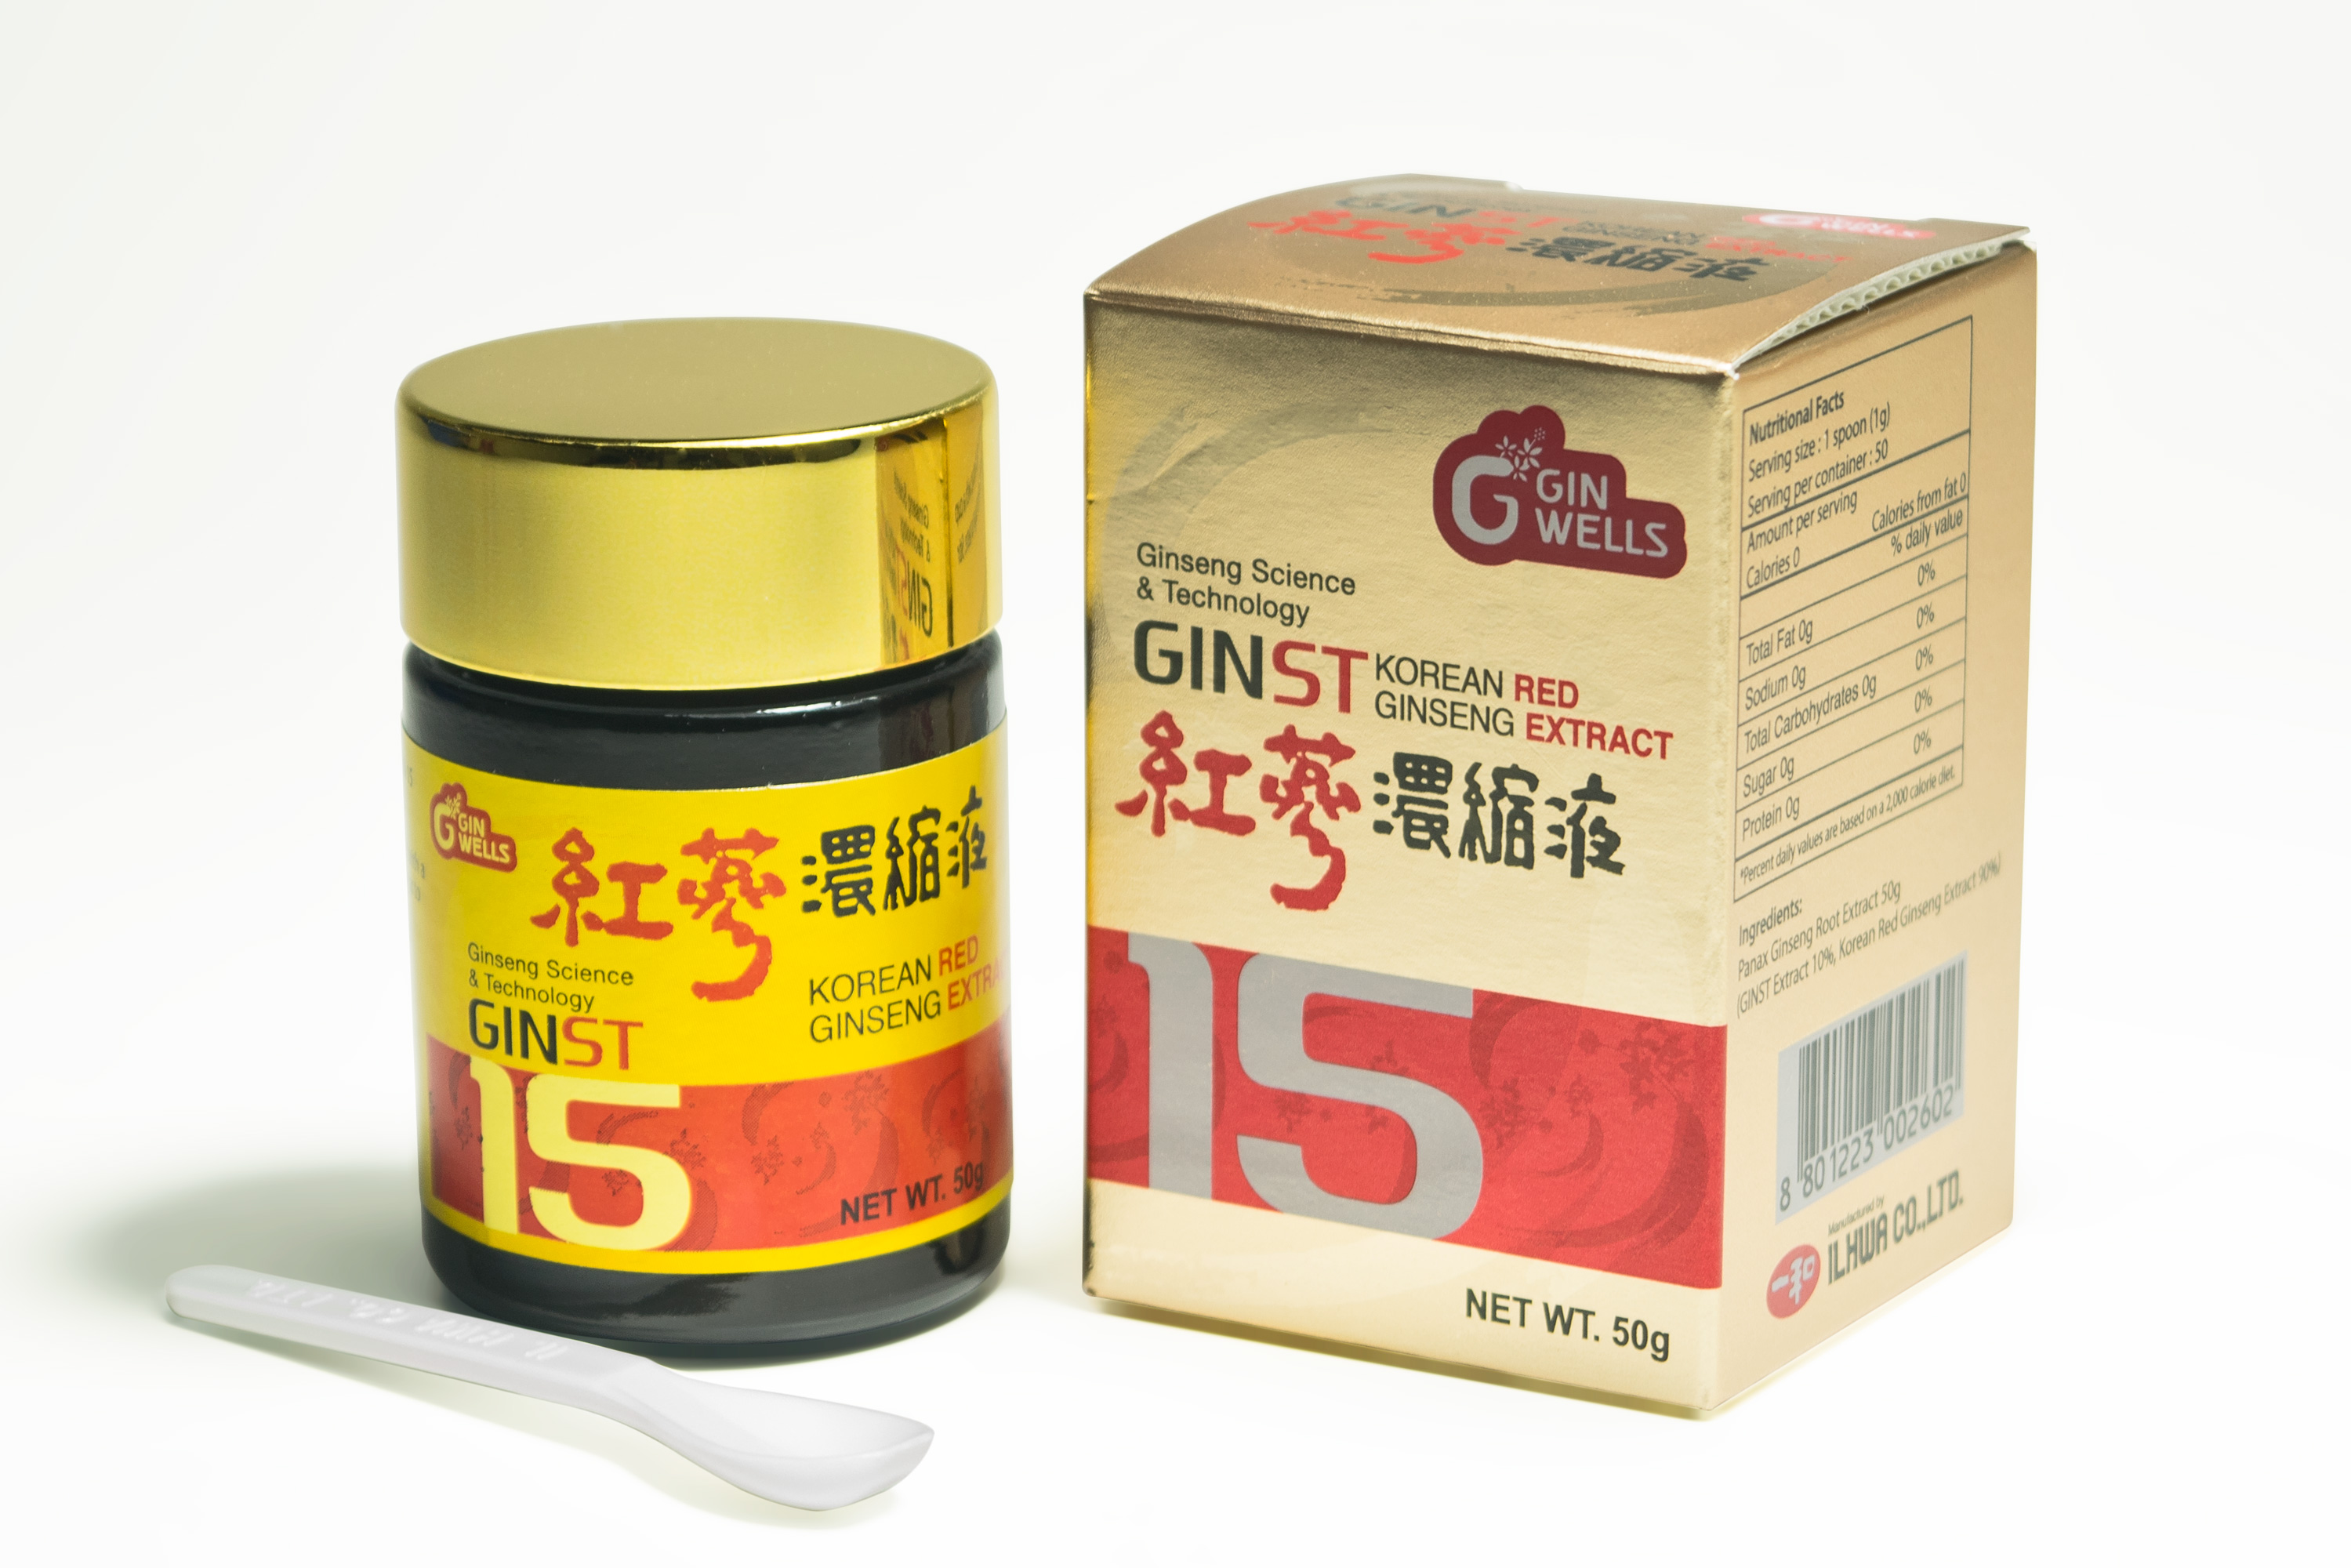 GINST 15 KOREAN RED GINSENG EXTRACT 50GRMS